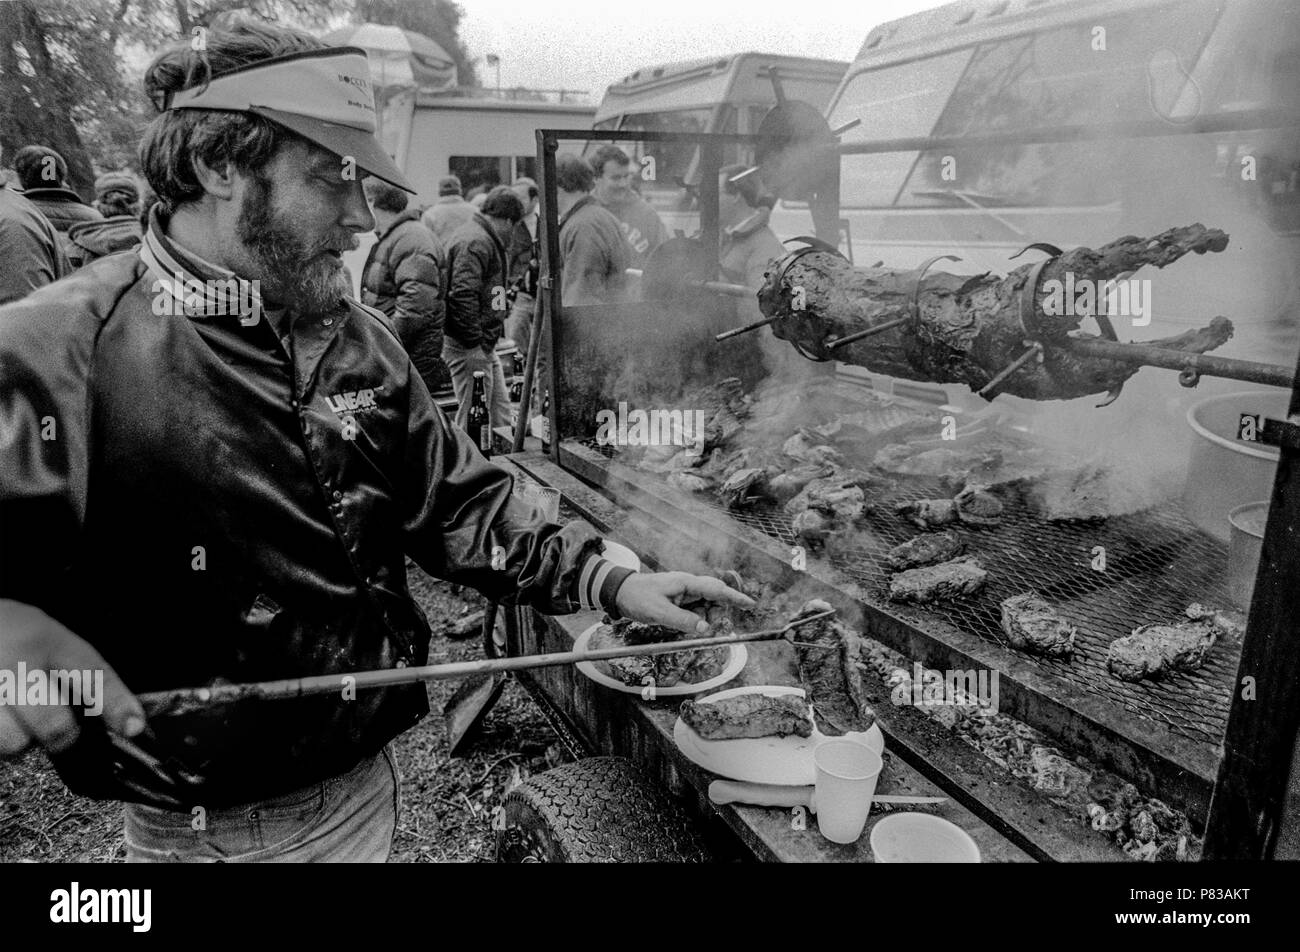 Stanford, California, USA. 20th Jan, 1985. Barbecue in action at the Super Bowl XIX tailgate on the Stanford University campus. The San Francisco 49ers defeated the Miami Dolphins 38-16 on Sunday, January 20, 1985. Credit: Al Golub/ZUMA Wire/Alamy Live News Stock Photo